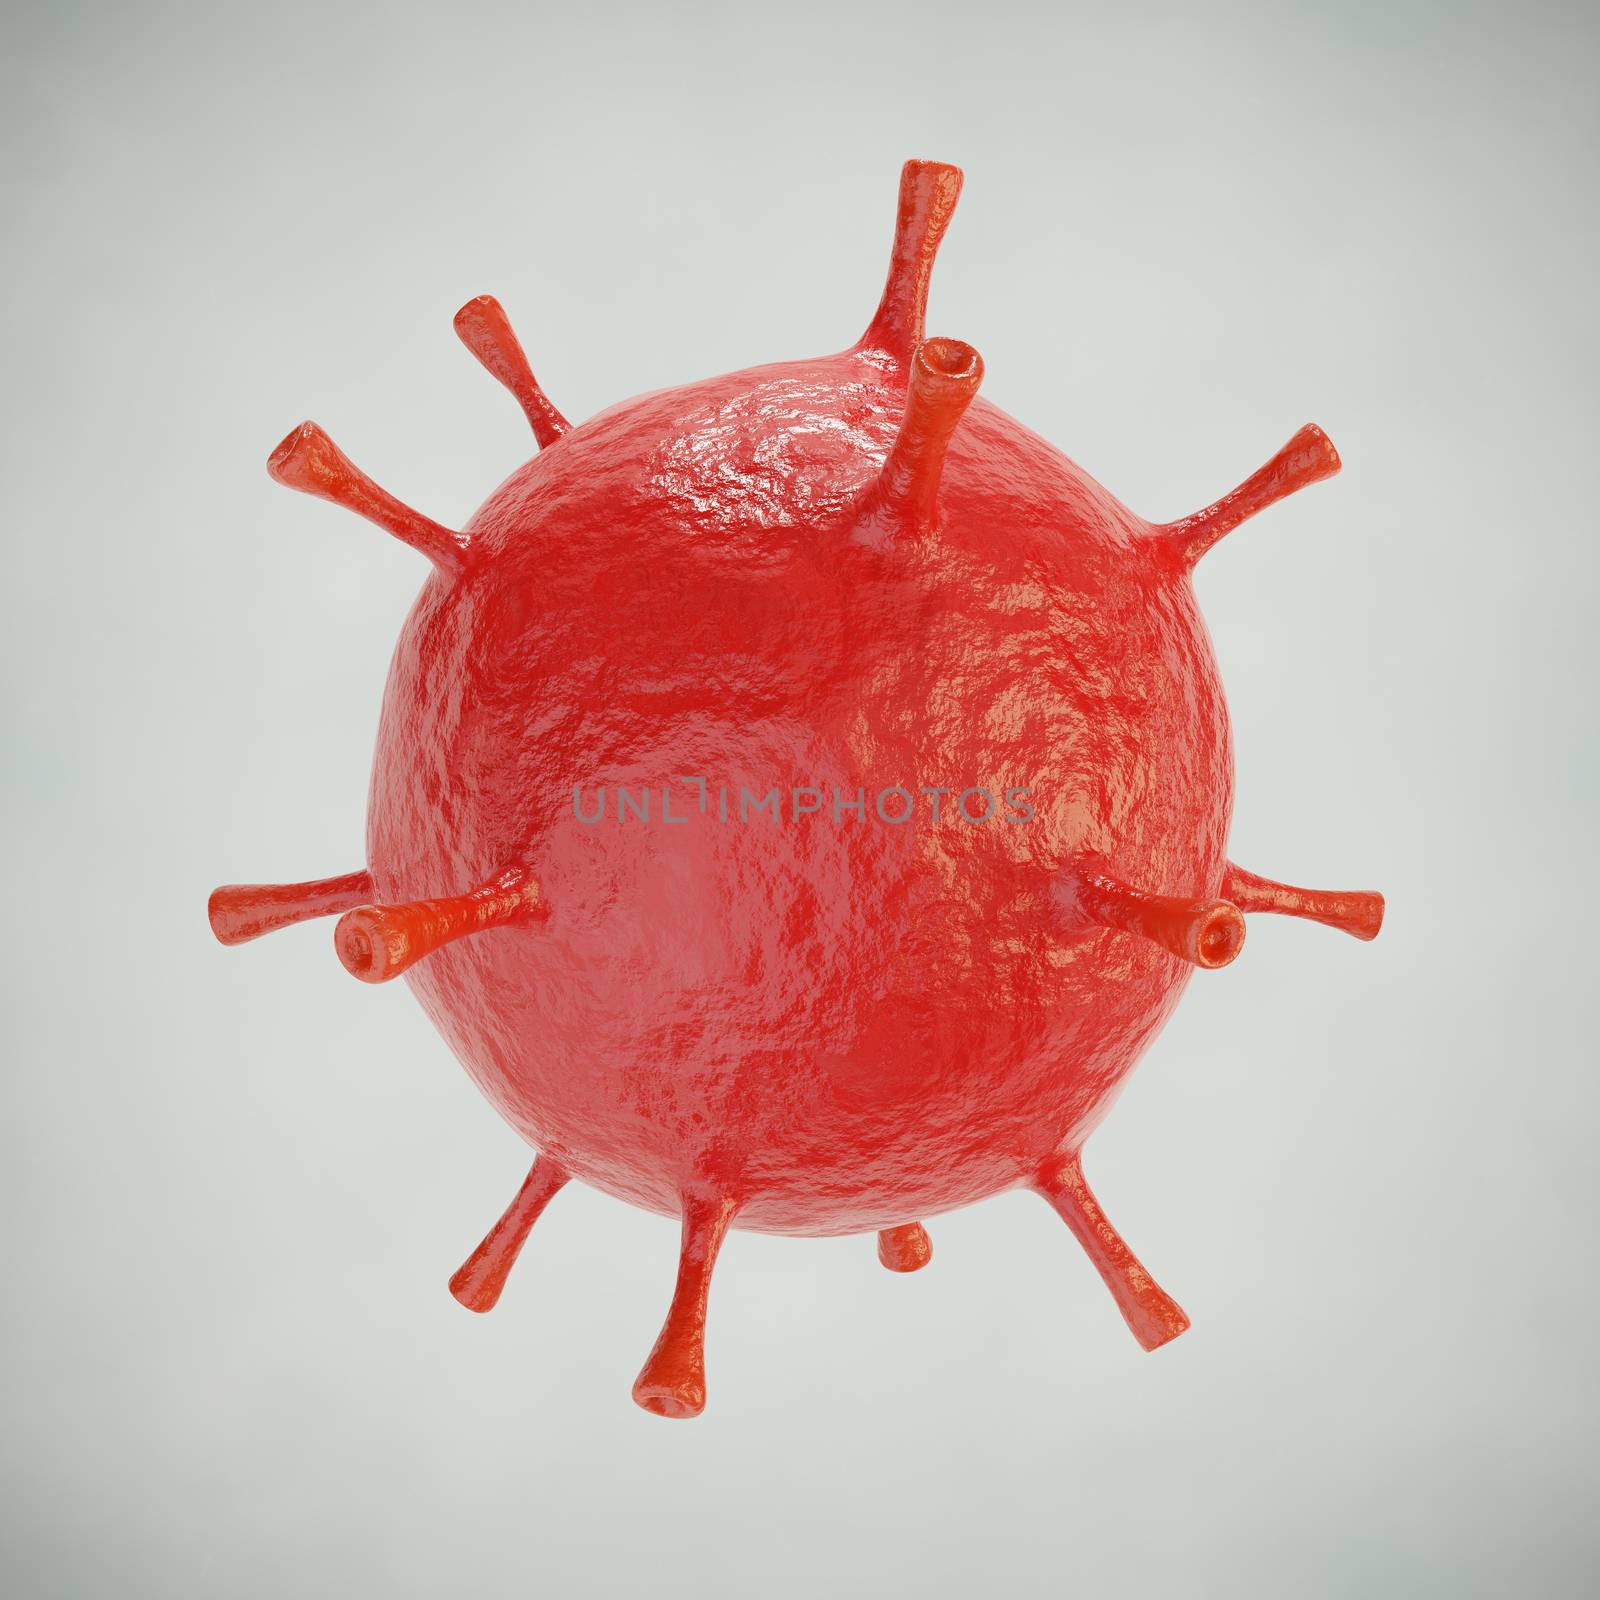 Red Microscope Virus Close Up Isolated on Gray Background 3D Illustration